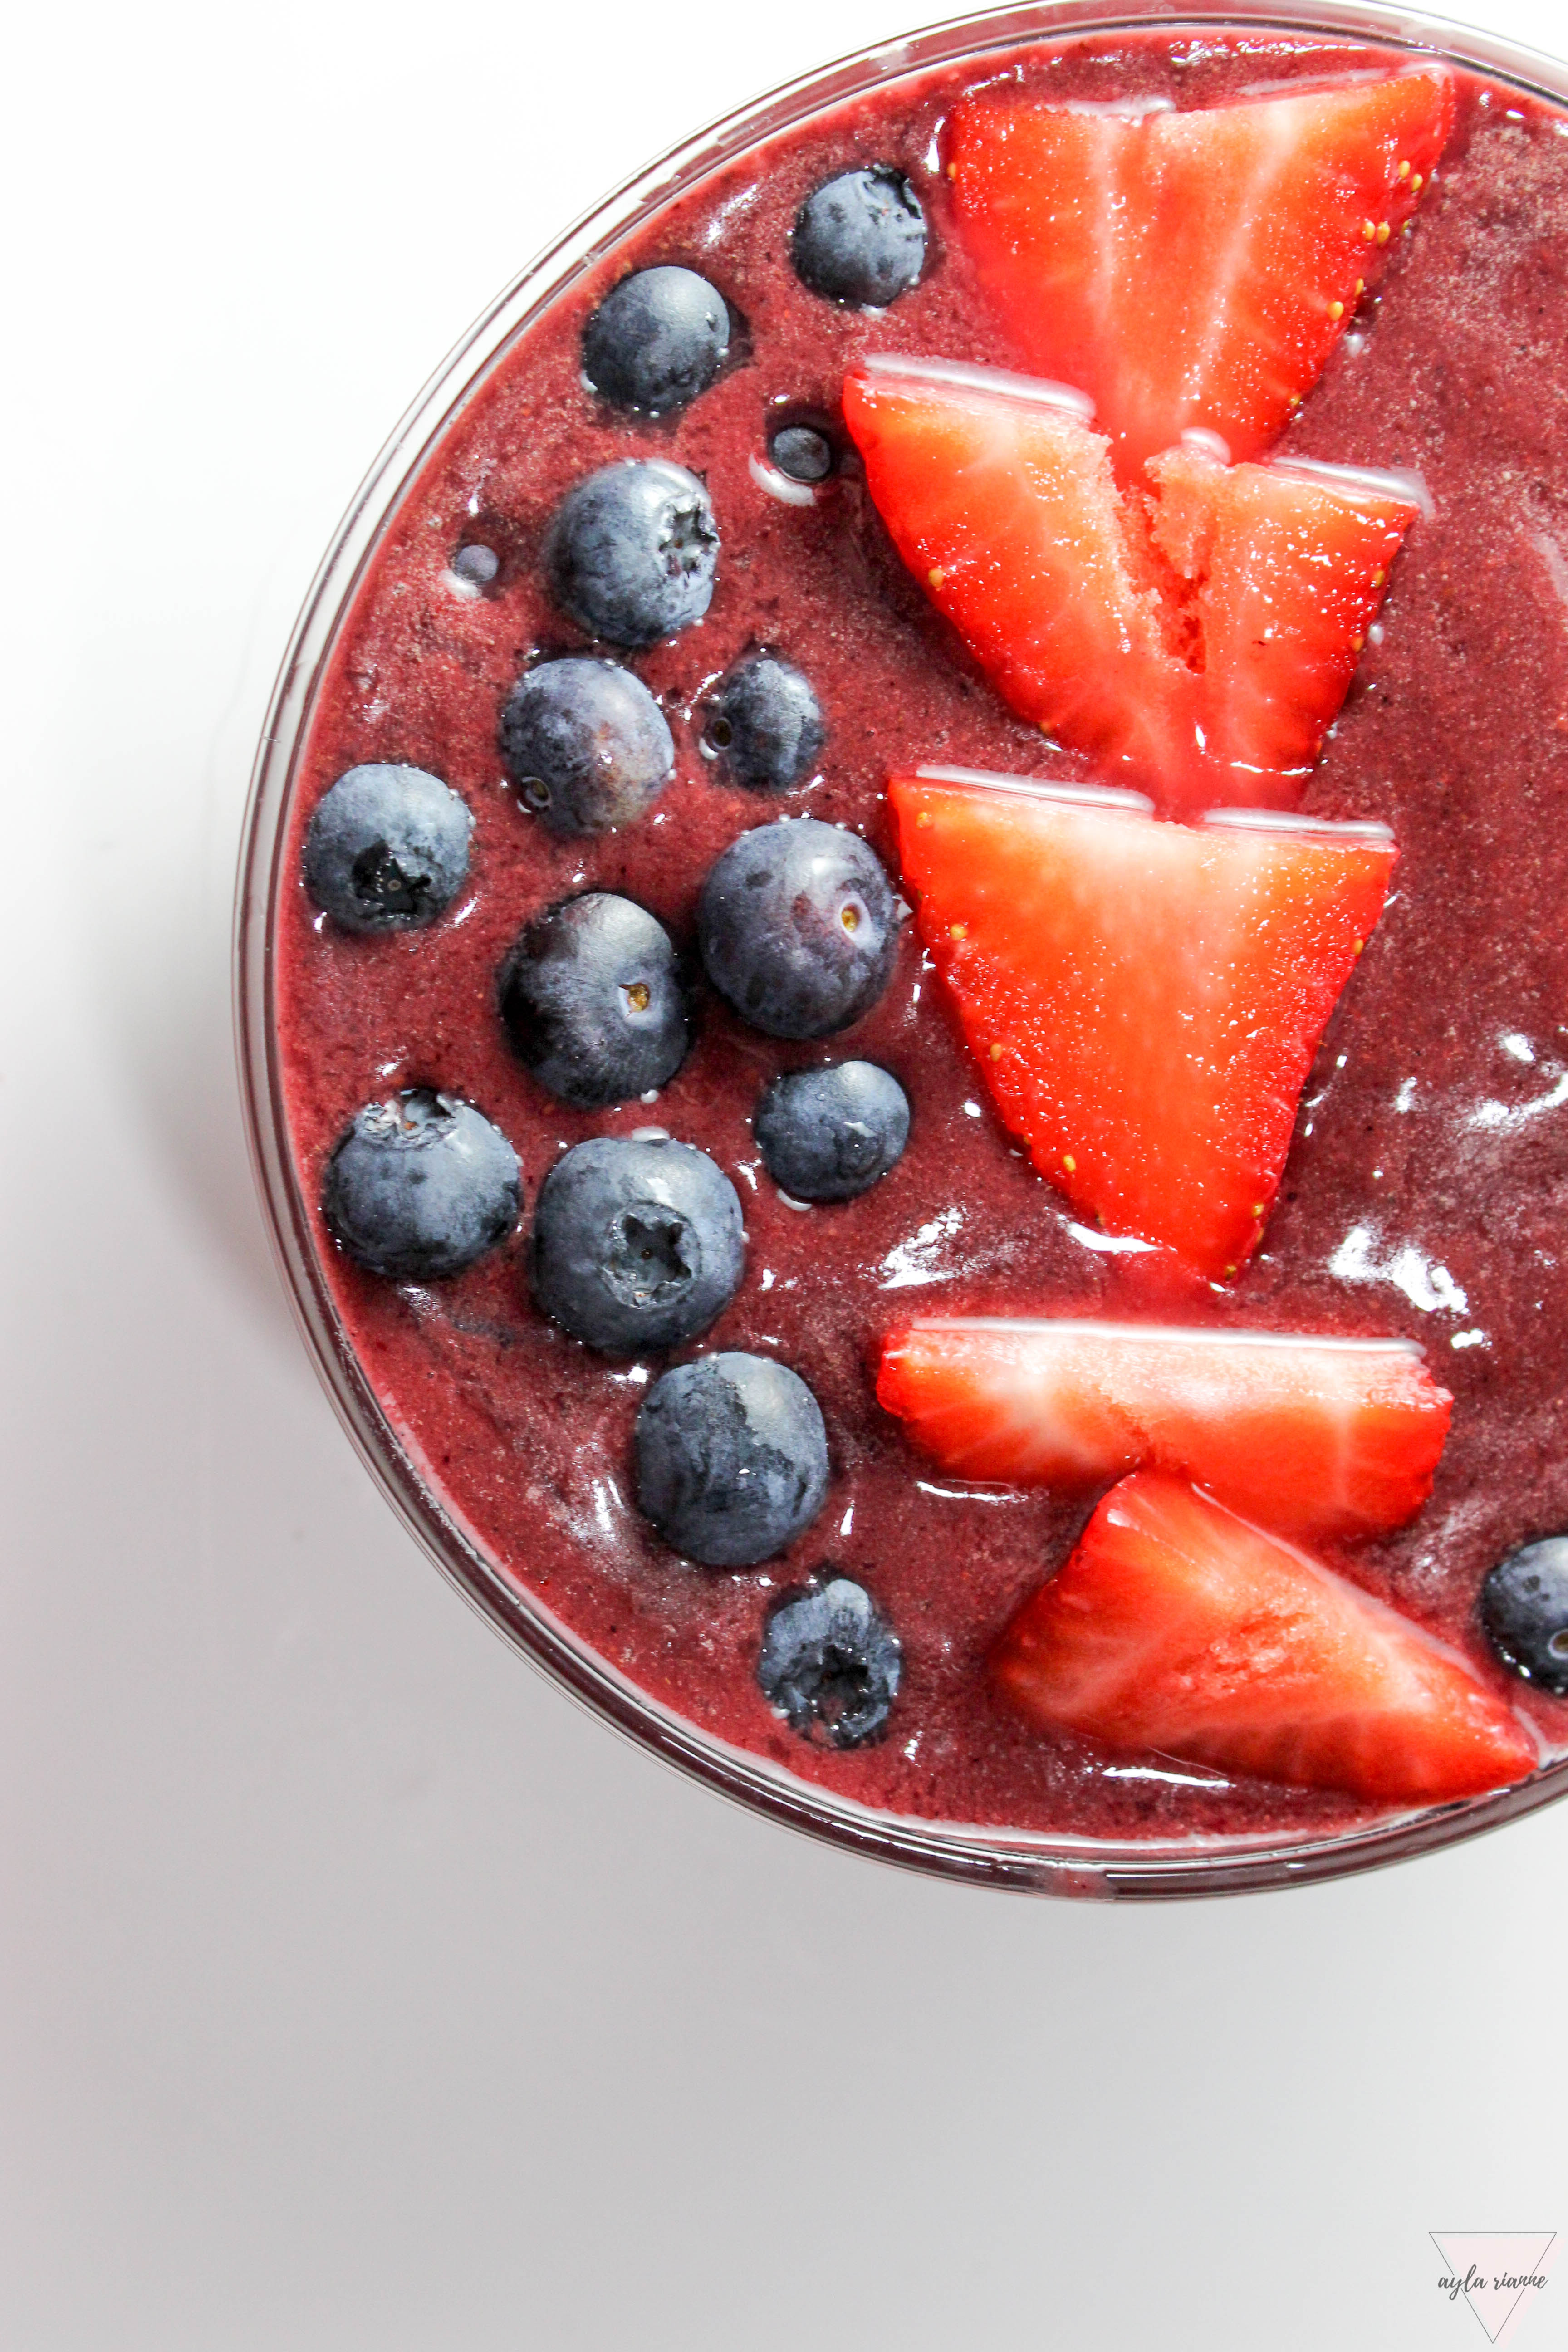 Classic 4 ingredient Acai Bowl topped with blueberries and strawberries #acaibowl #smoothiebowl